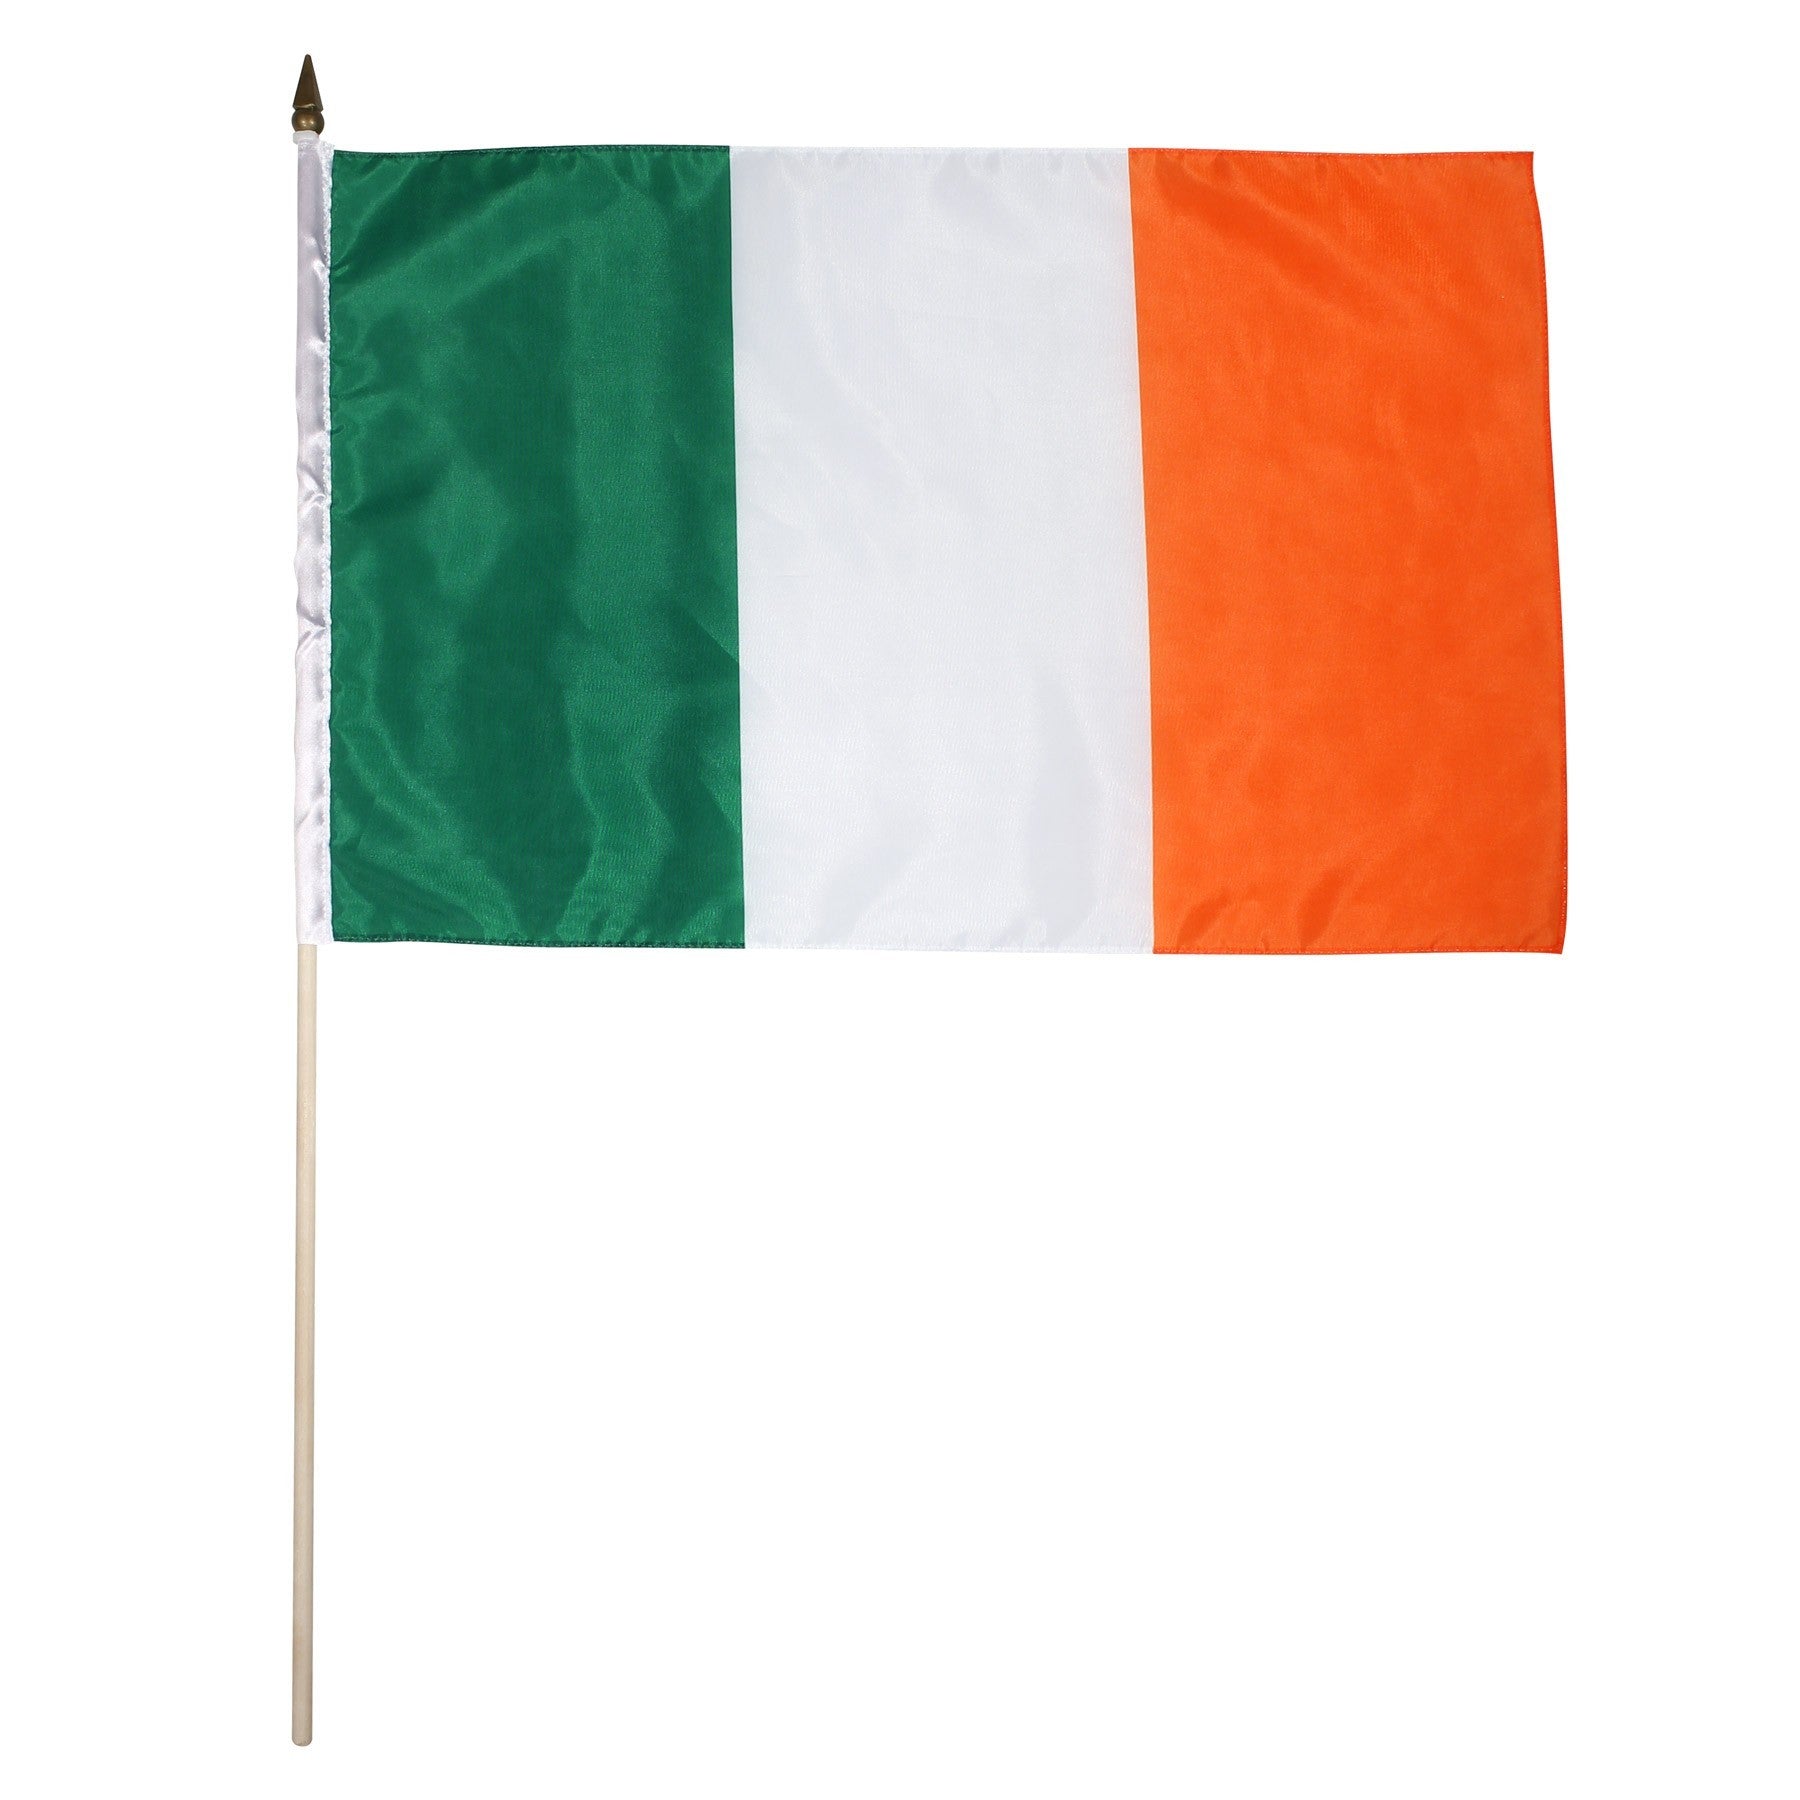 Ireland Flags For Sale Indoor and Outdoor 1-800 Flags